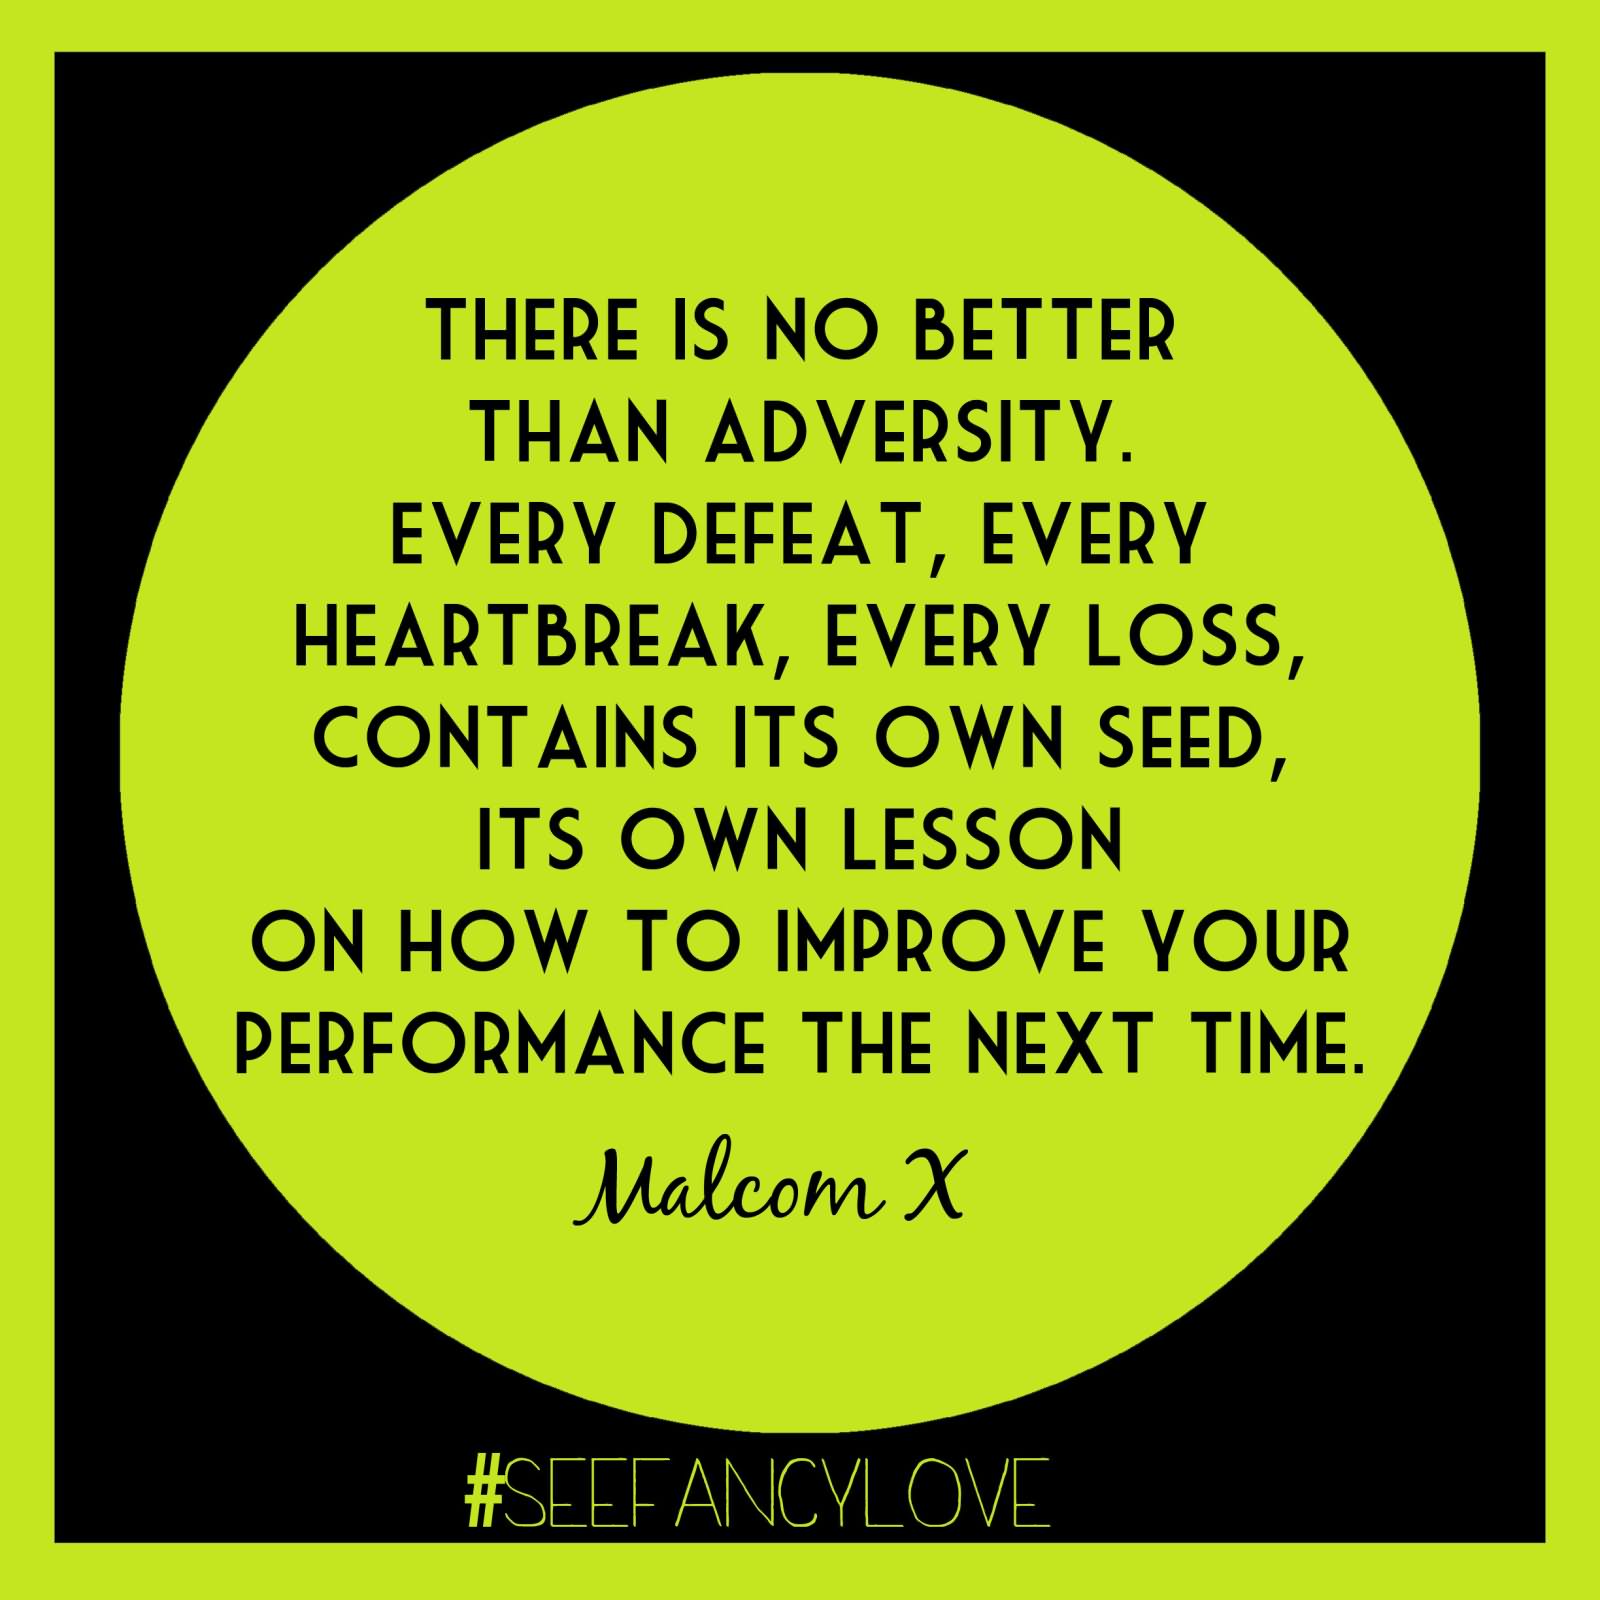 There is no better than adversity. Every defeat, every heartbreak, every loss, contains its own seed, its own lesson on how to improve your performance the next time - Malcom X